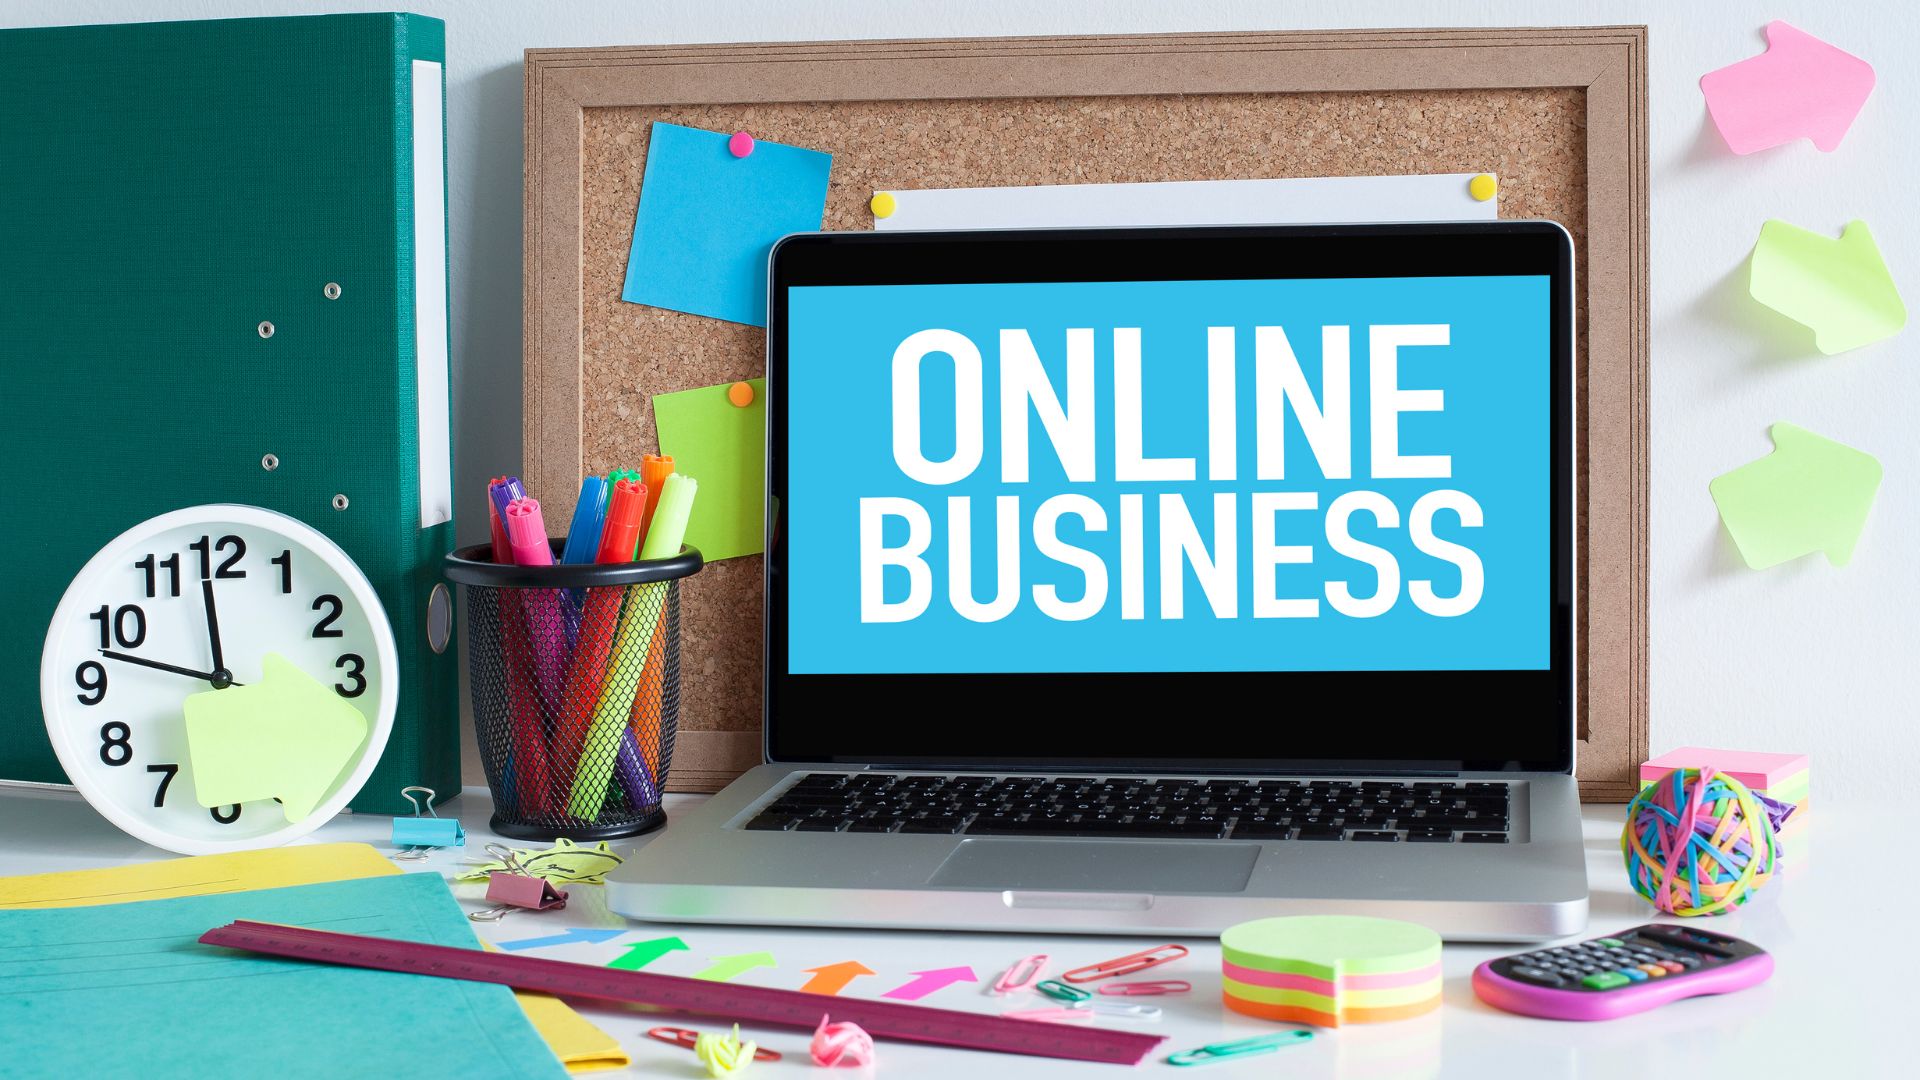 How to Build Your Online Business From Scratch Under Budget